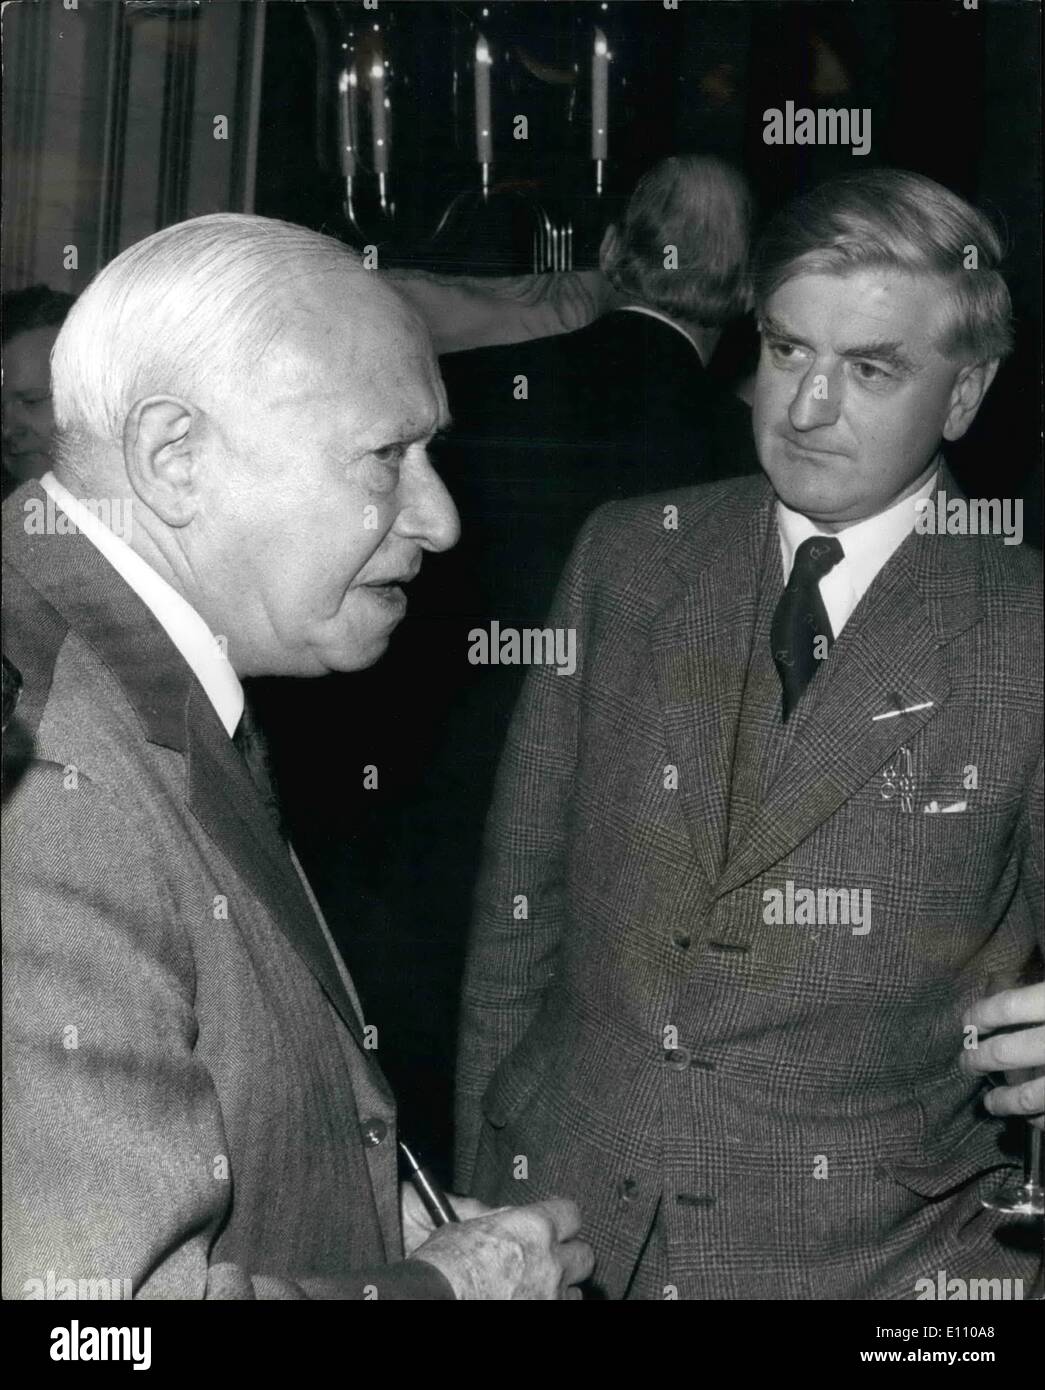 Nov. 11, 1974 - Men of the year luncheon: Pictured at today's men of the Luncheon at the Savoy Hotel, are Lord Shinwell (left), Stock Photo